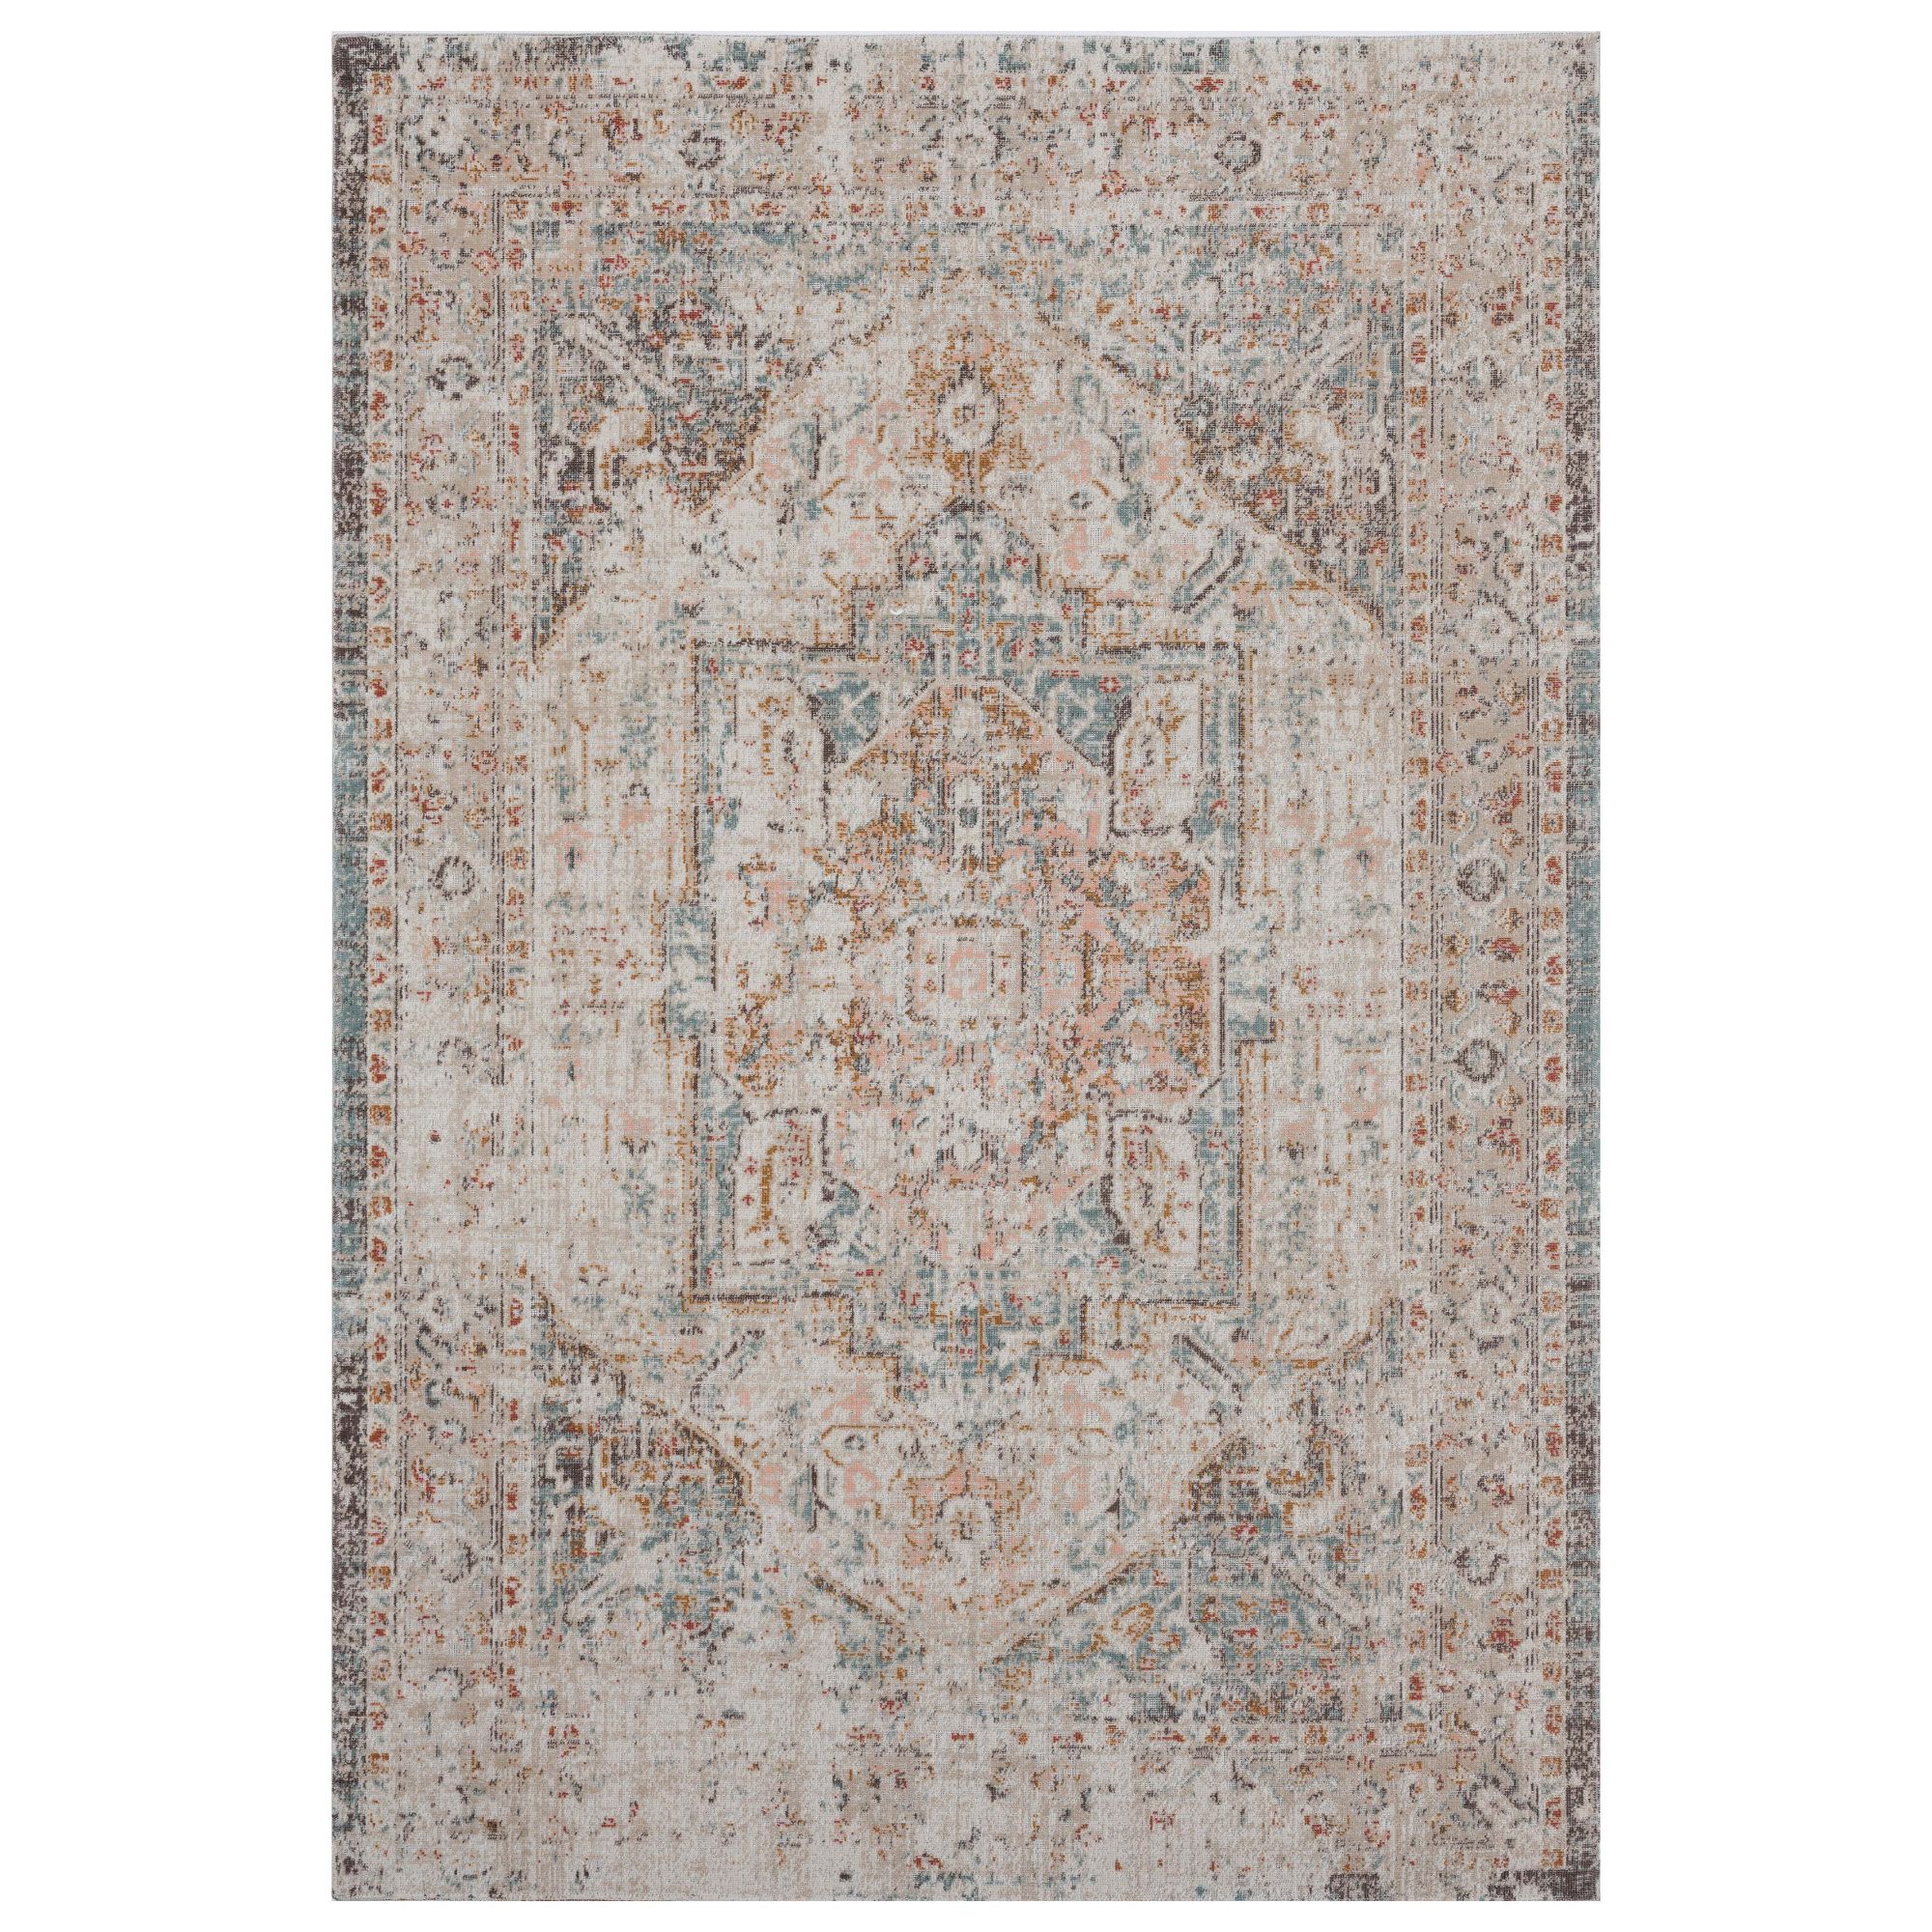 Laddha Home Designs 5.25' x 7.75' Beige and Brown Distressed Medallion Rectangular Outdoor Area Throw Rug